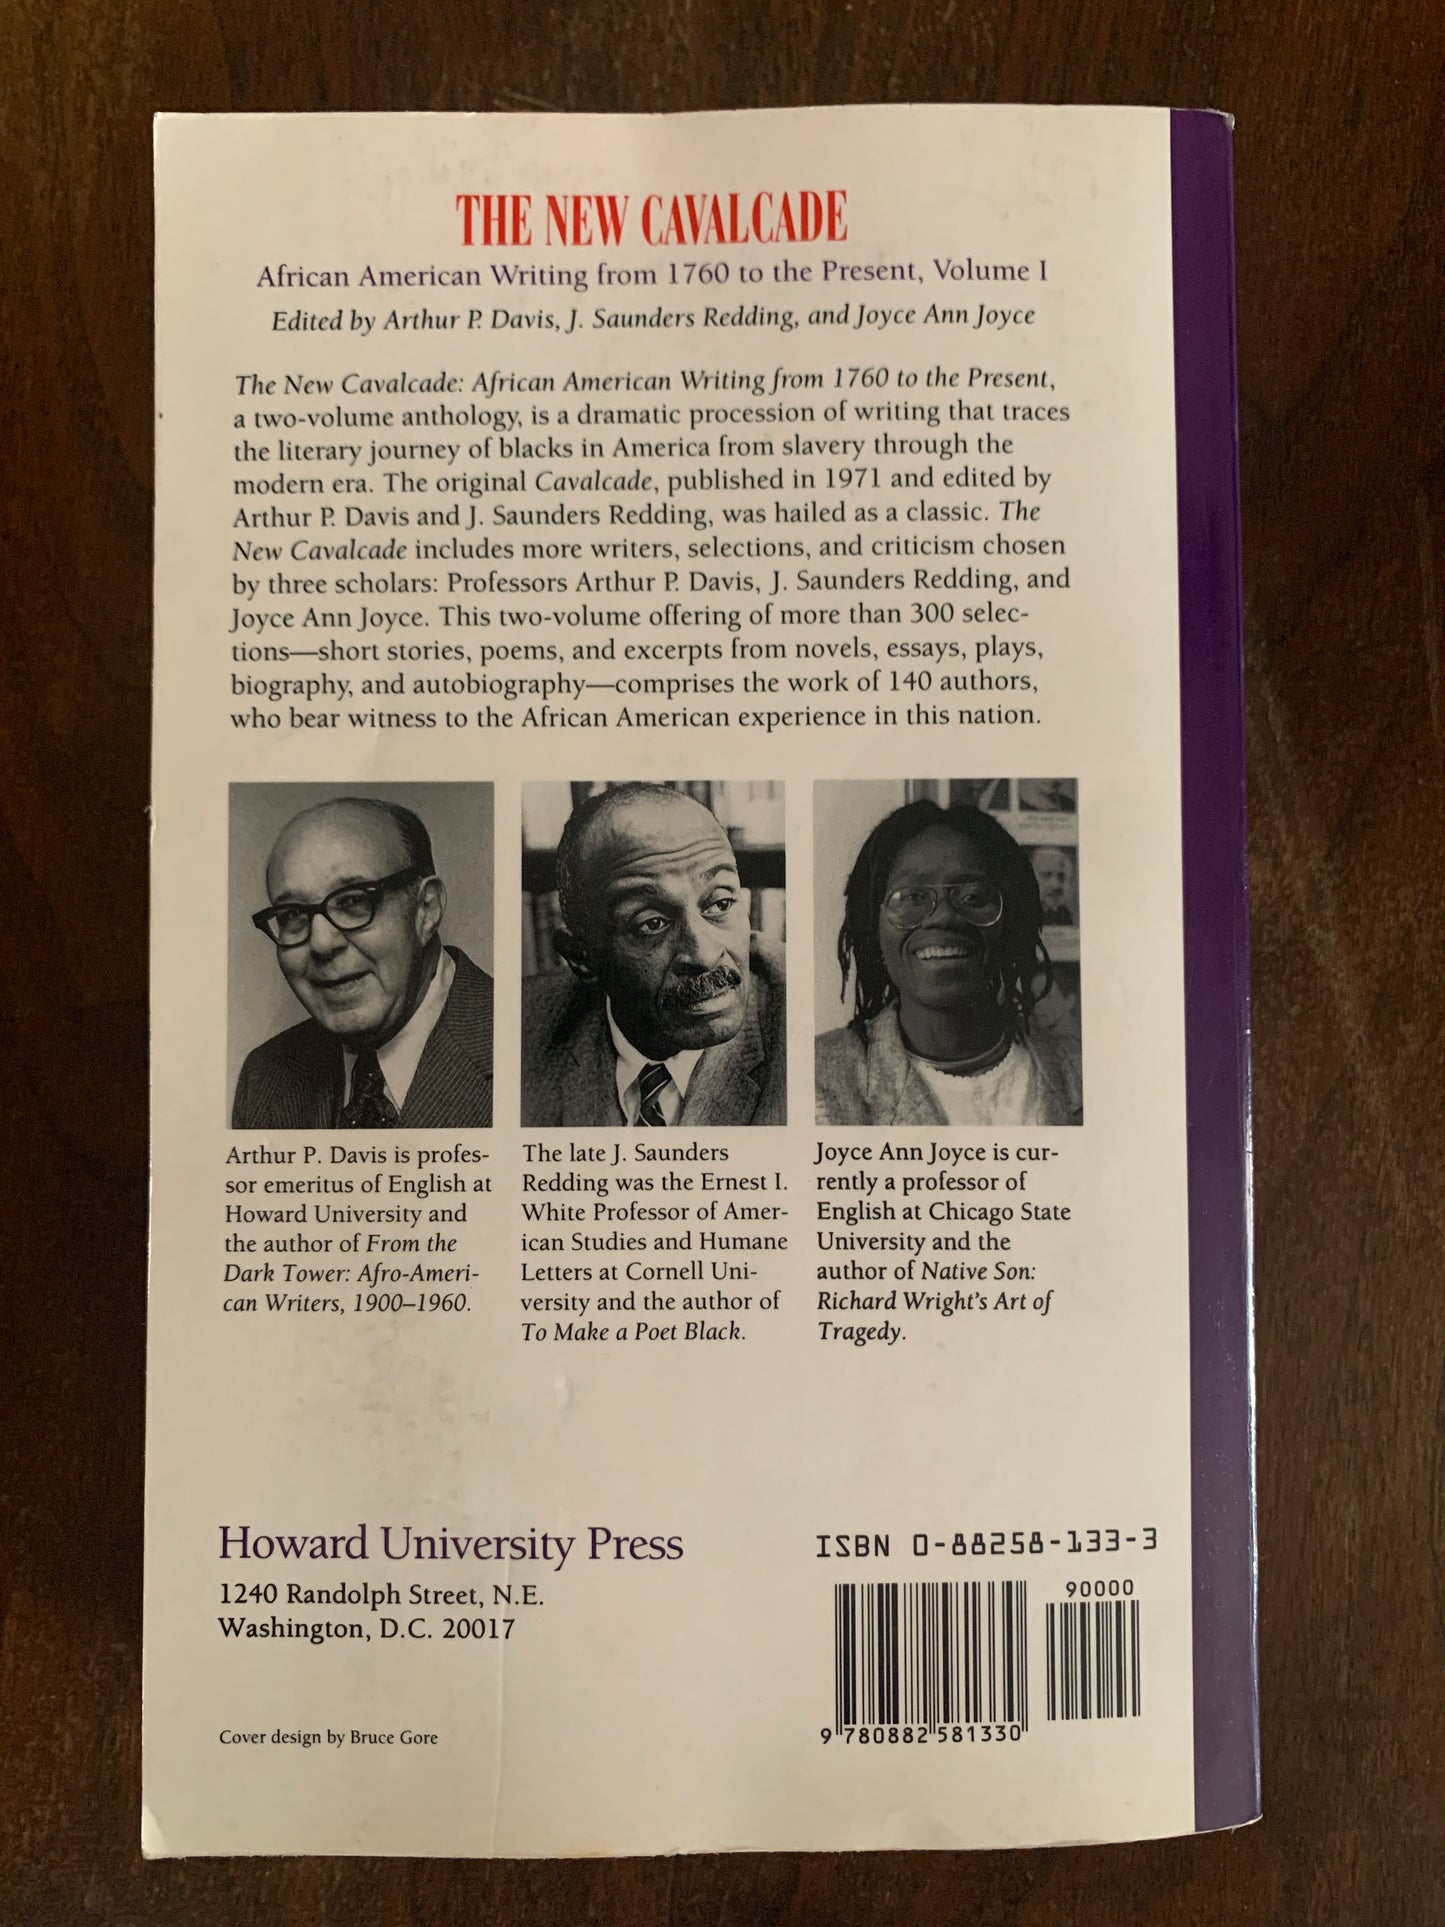 The New Cavalcade: African American Writing from 1760 to the Present Volume 1